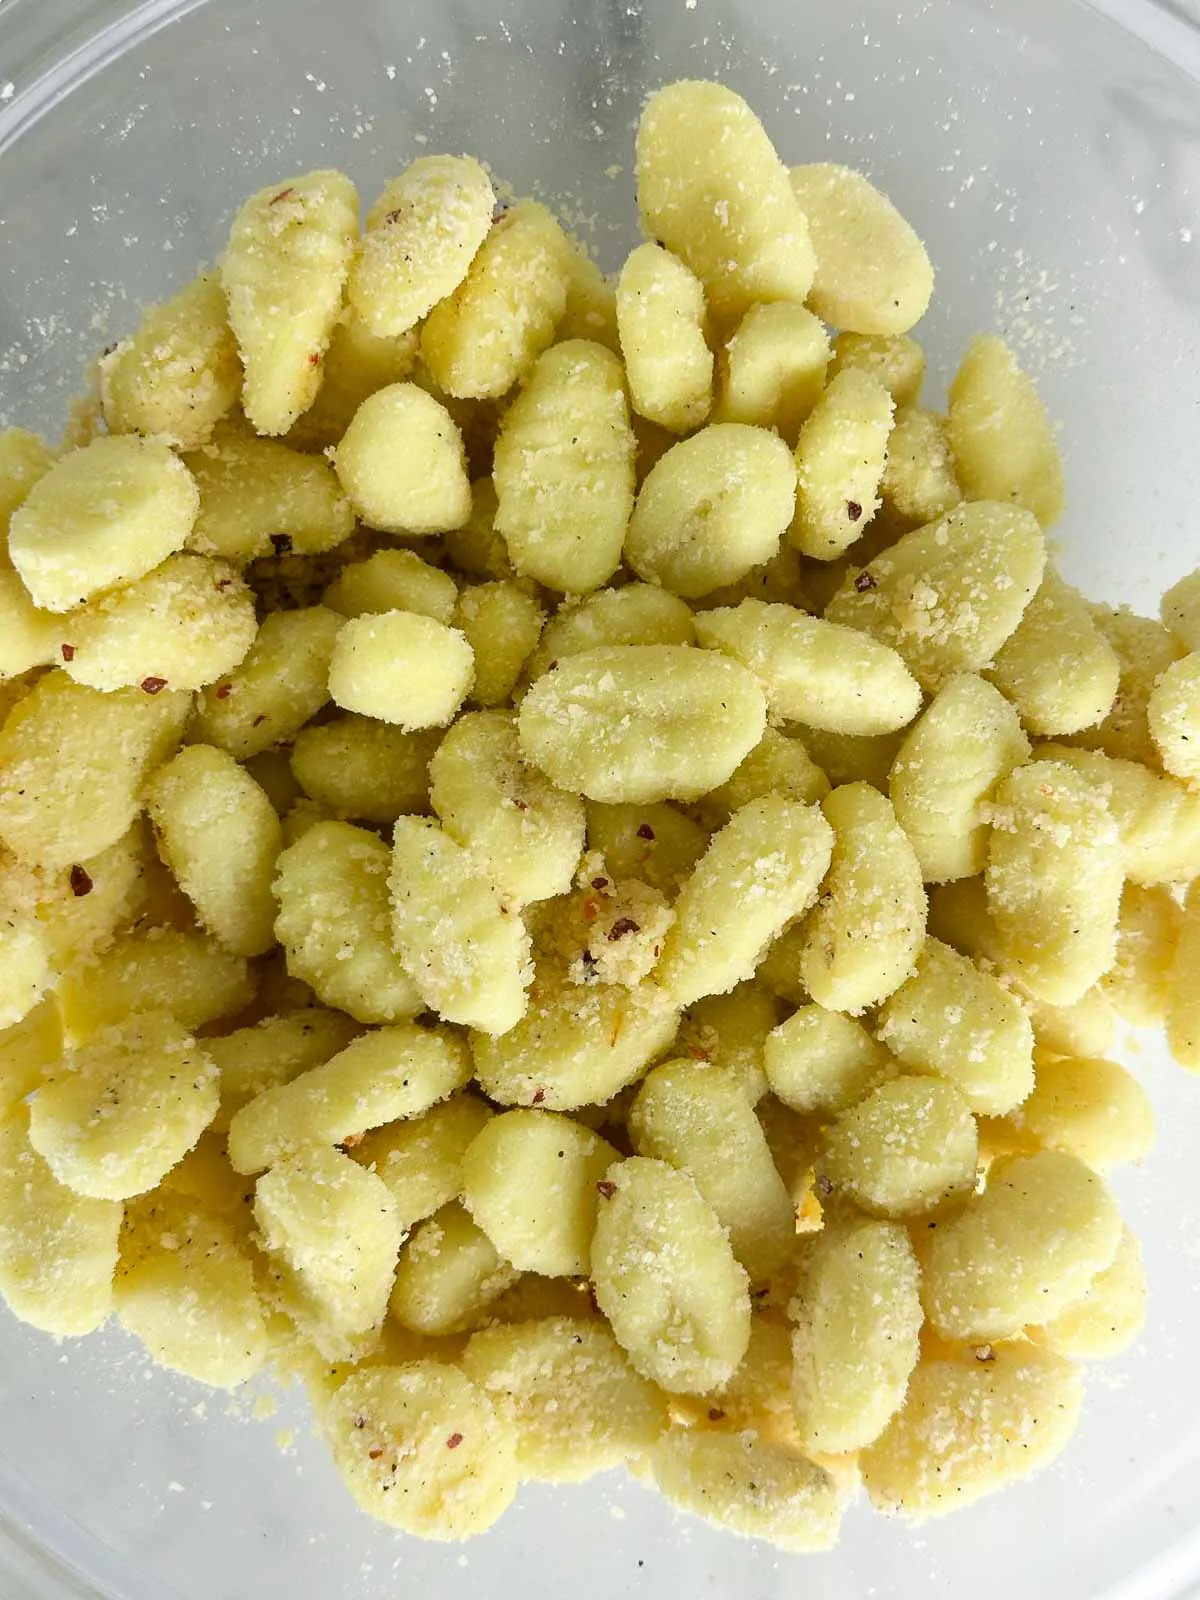 Toss the gnocchi with olive oil, Parmesan cheese, and seasonings to coat it.